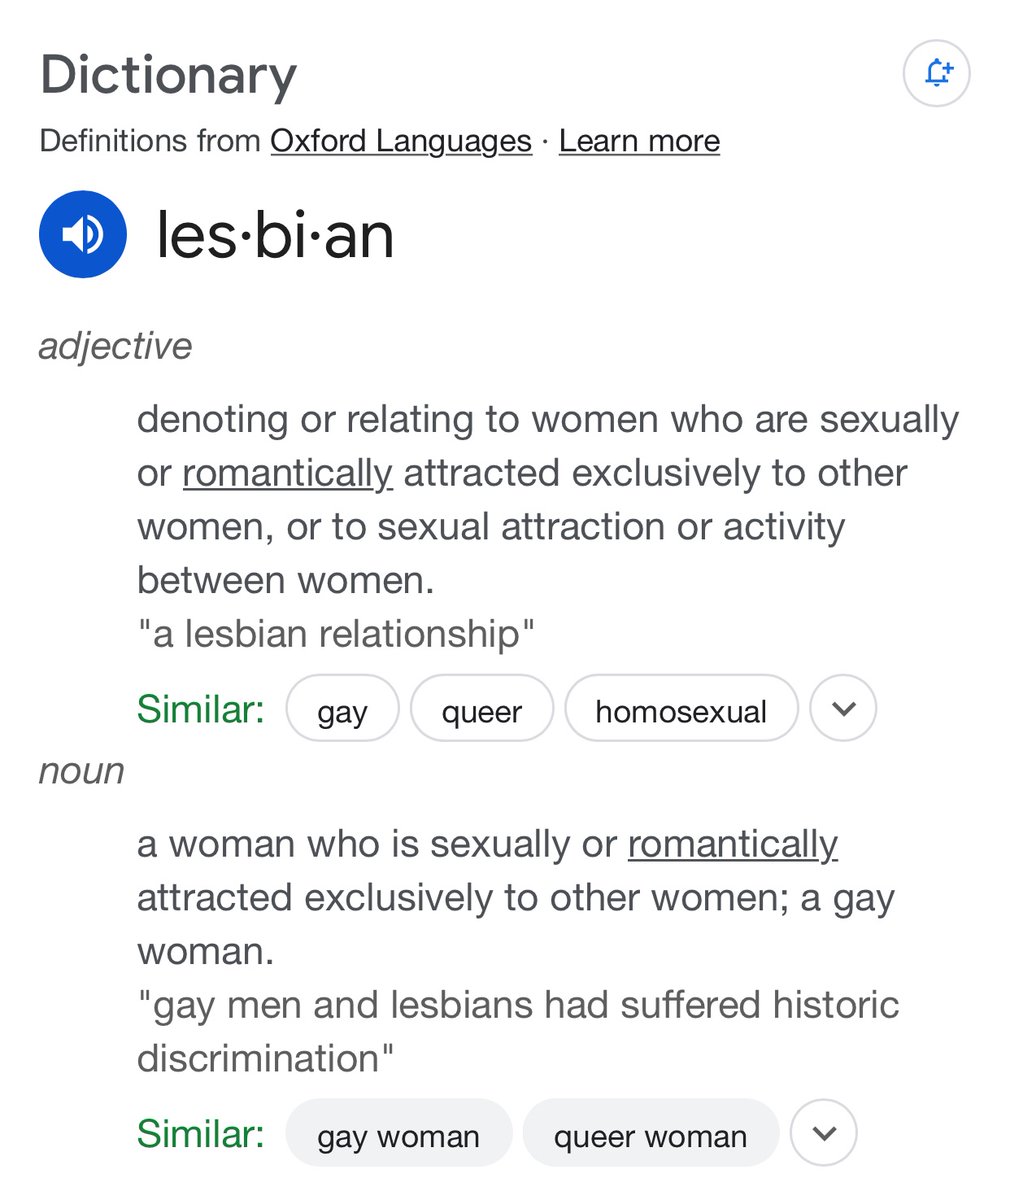 Lesbian: a woman sexually or romantically attracted to other women. Men do NOT qualify no matter what they claim to be. Sit down, you bearded buffoons, you preposterous posers, and stay the f*** away from lesbian events! #LesbiansDontHavePenises